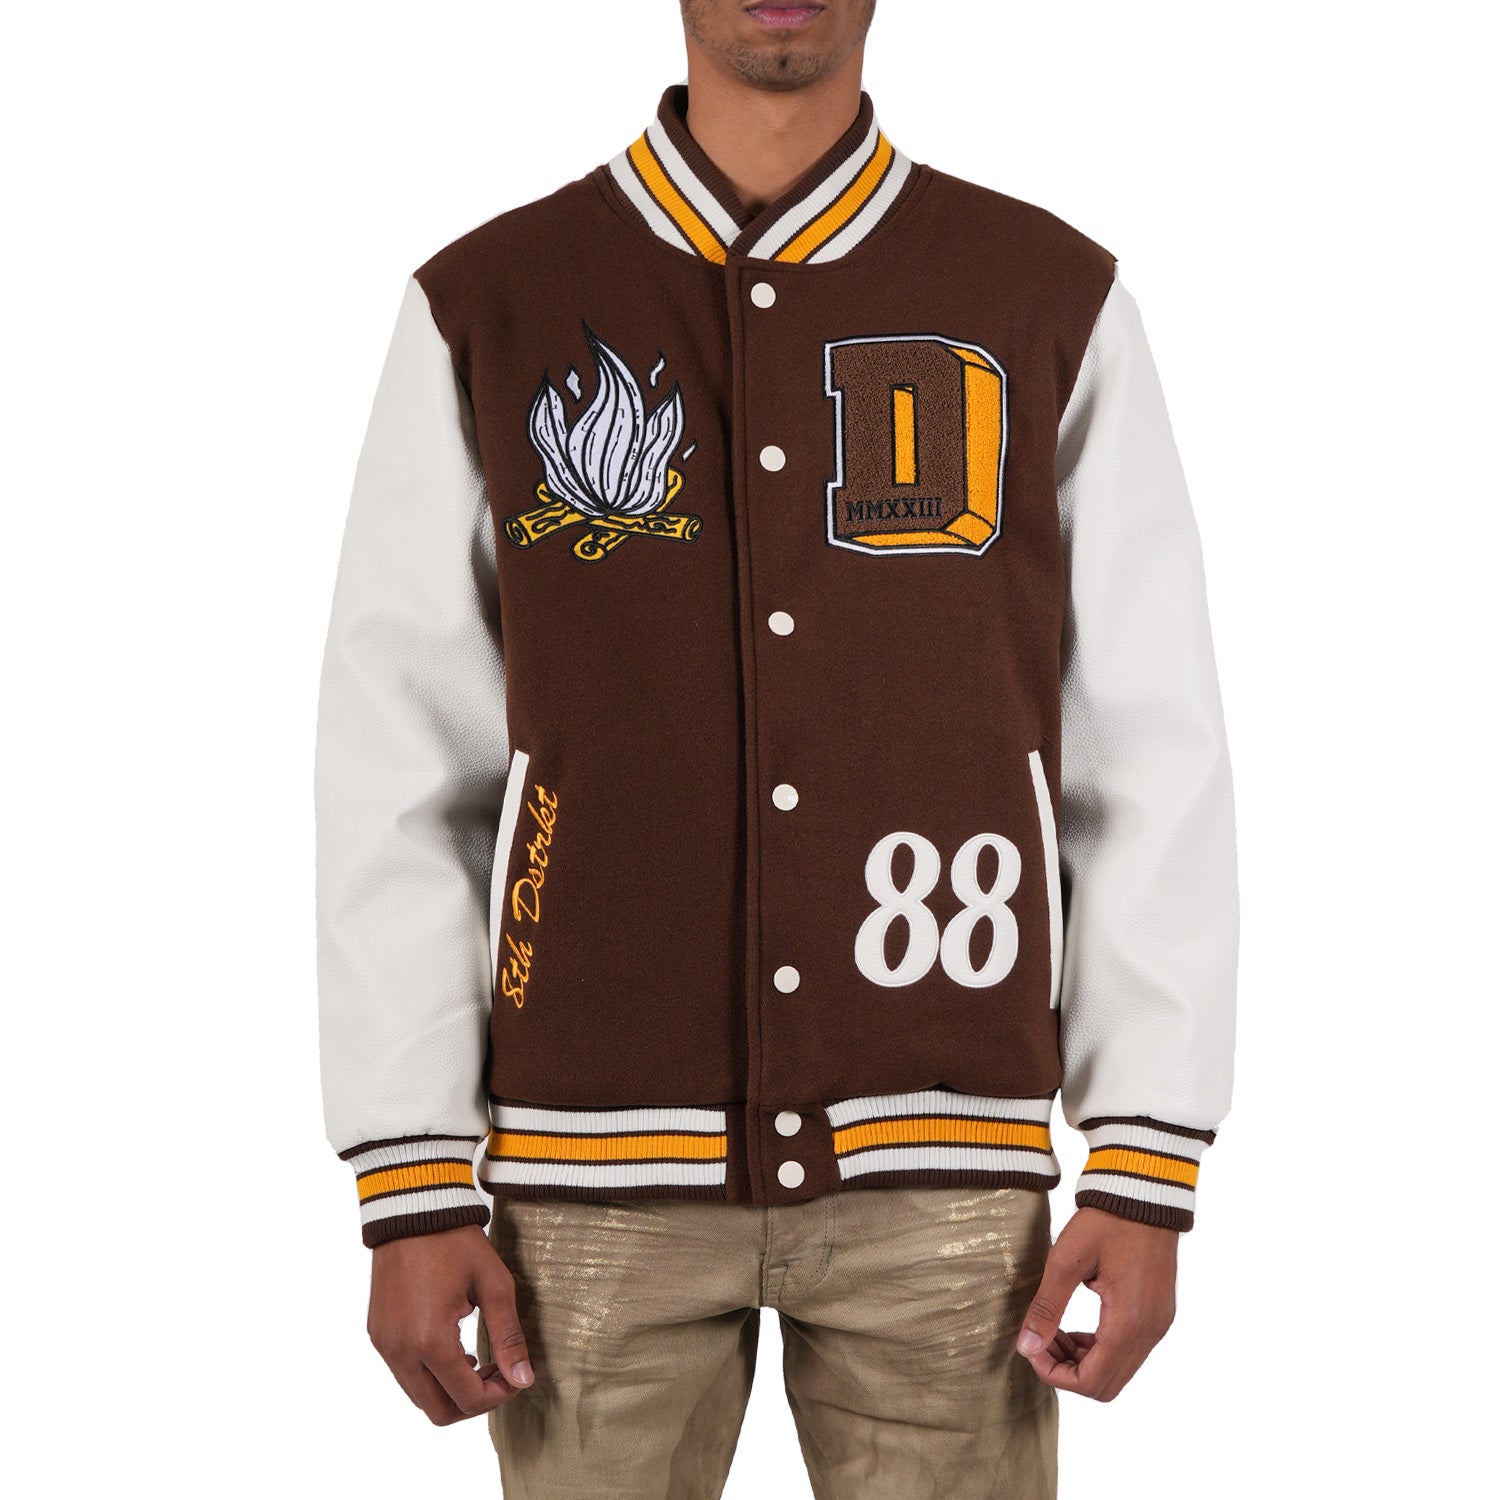 Men's "Born To Be Different" Varsity Bomber Jacket | Brown